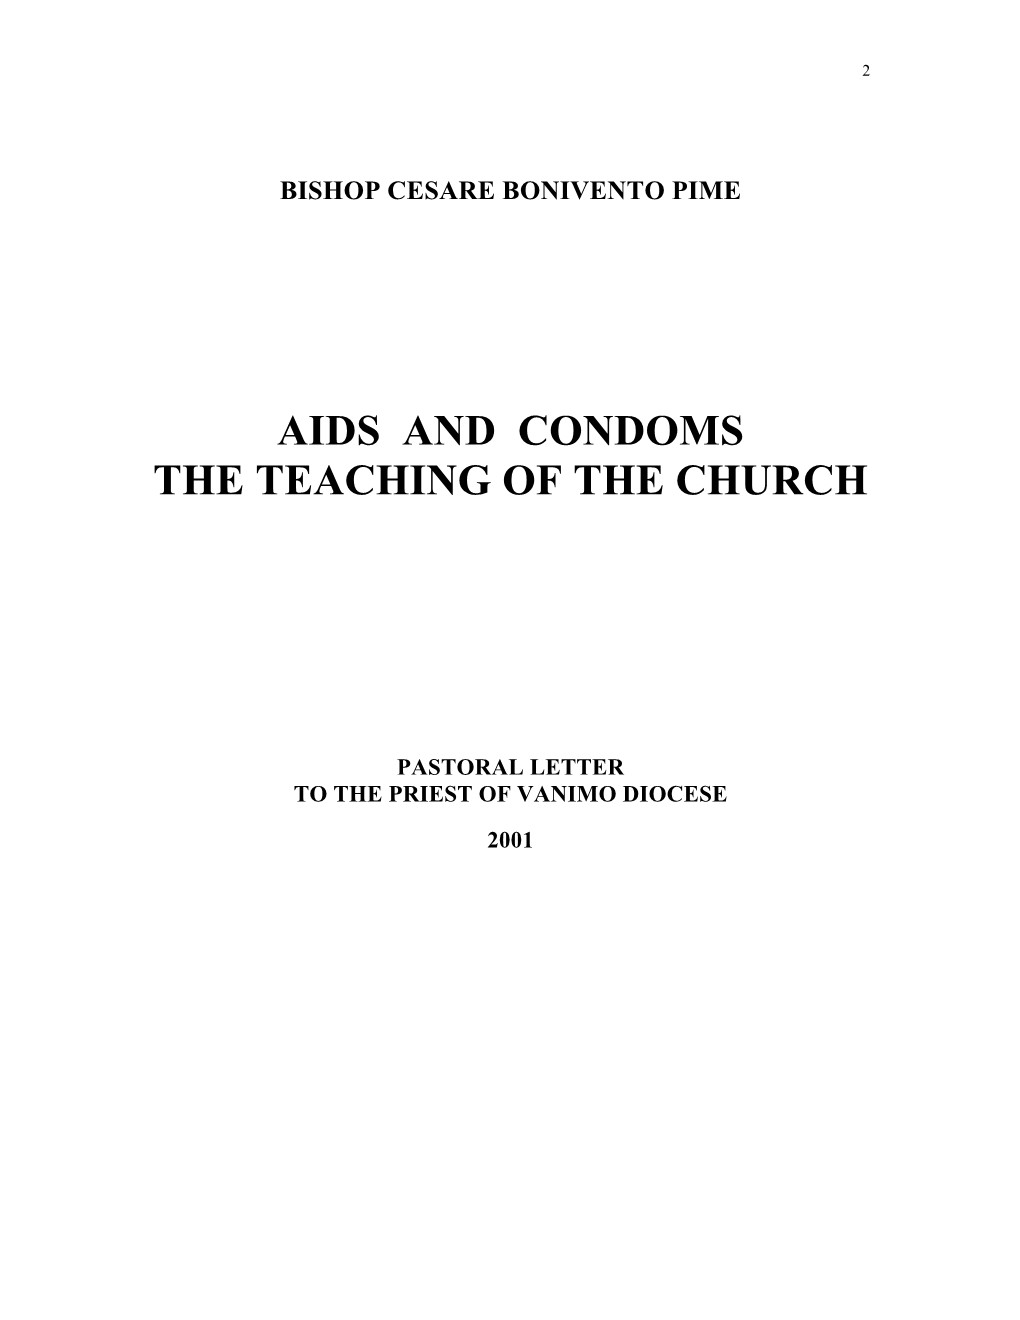 Aids and Condoms the Teaching of the Church